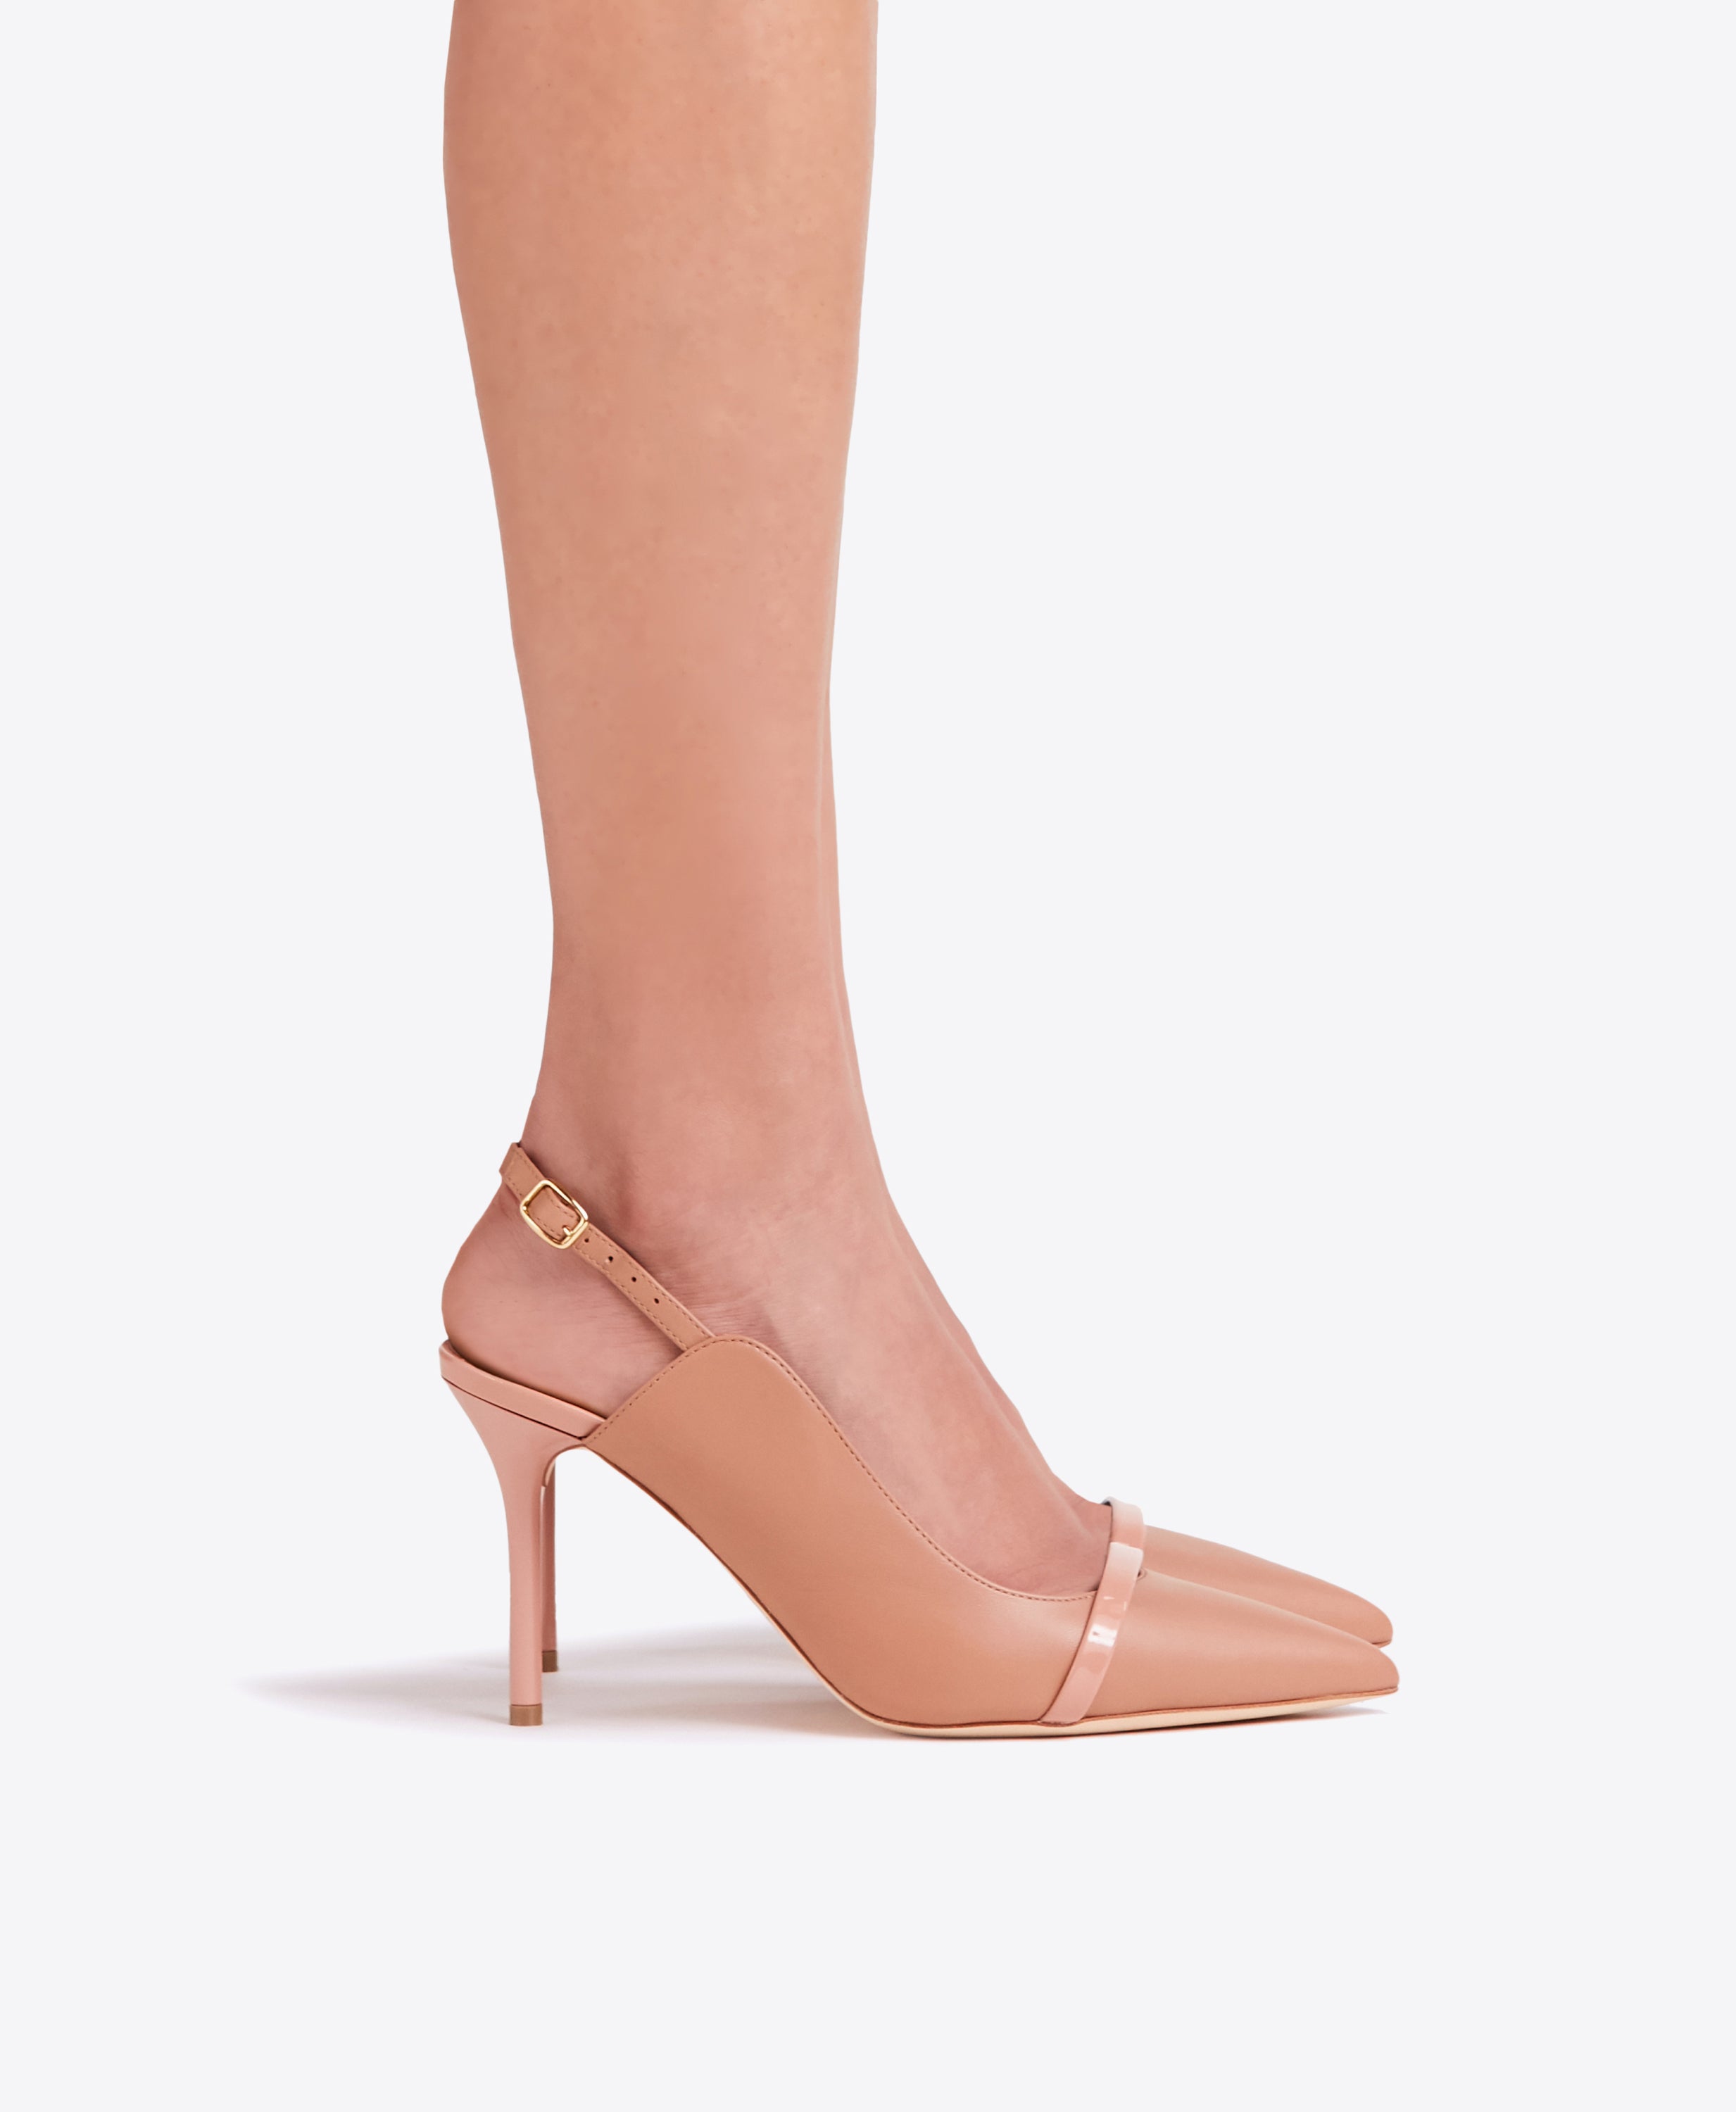 Malone Souliers Marion pump shoes - Gold